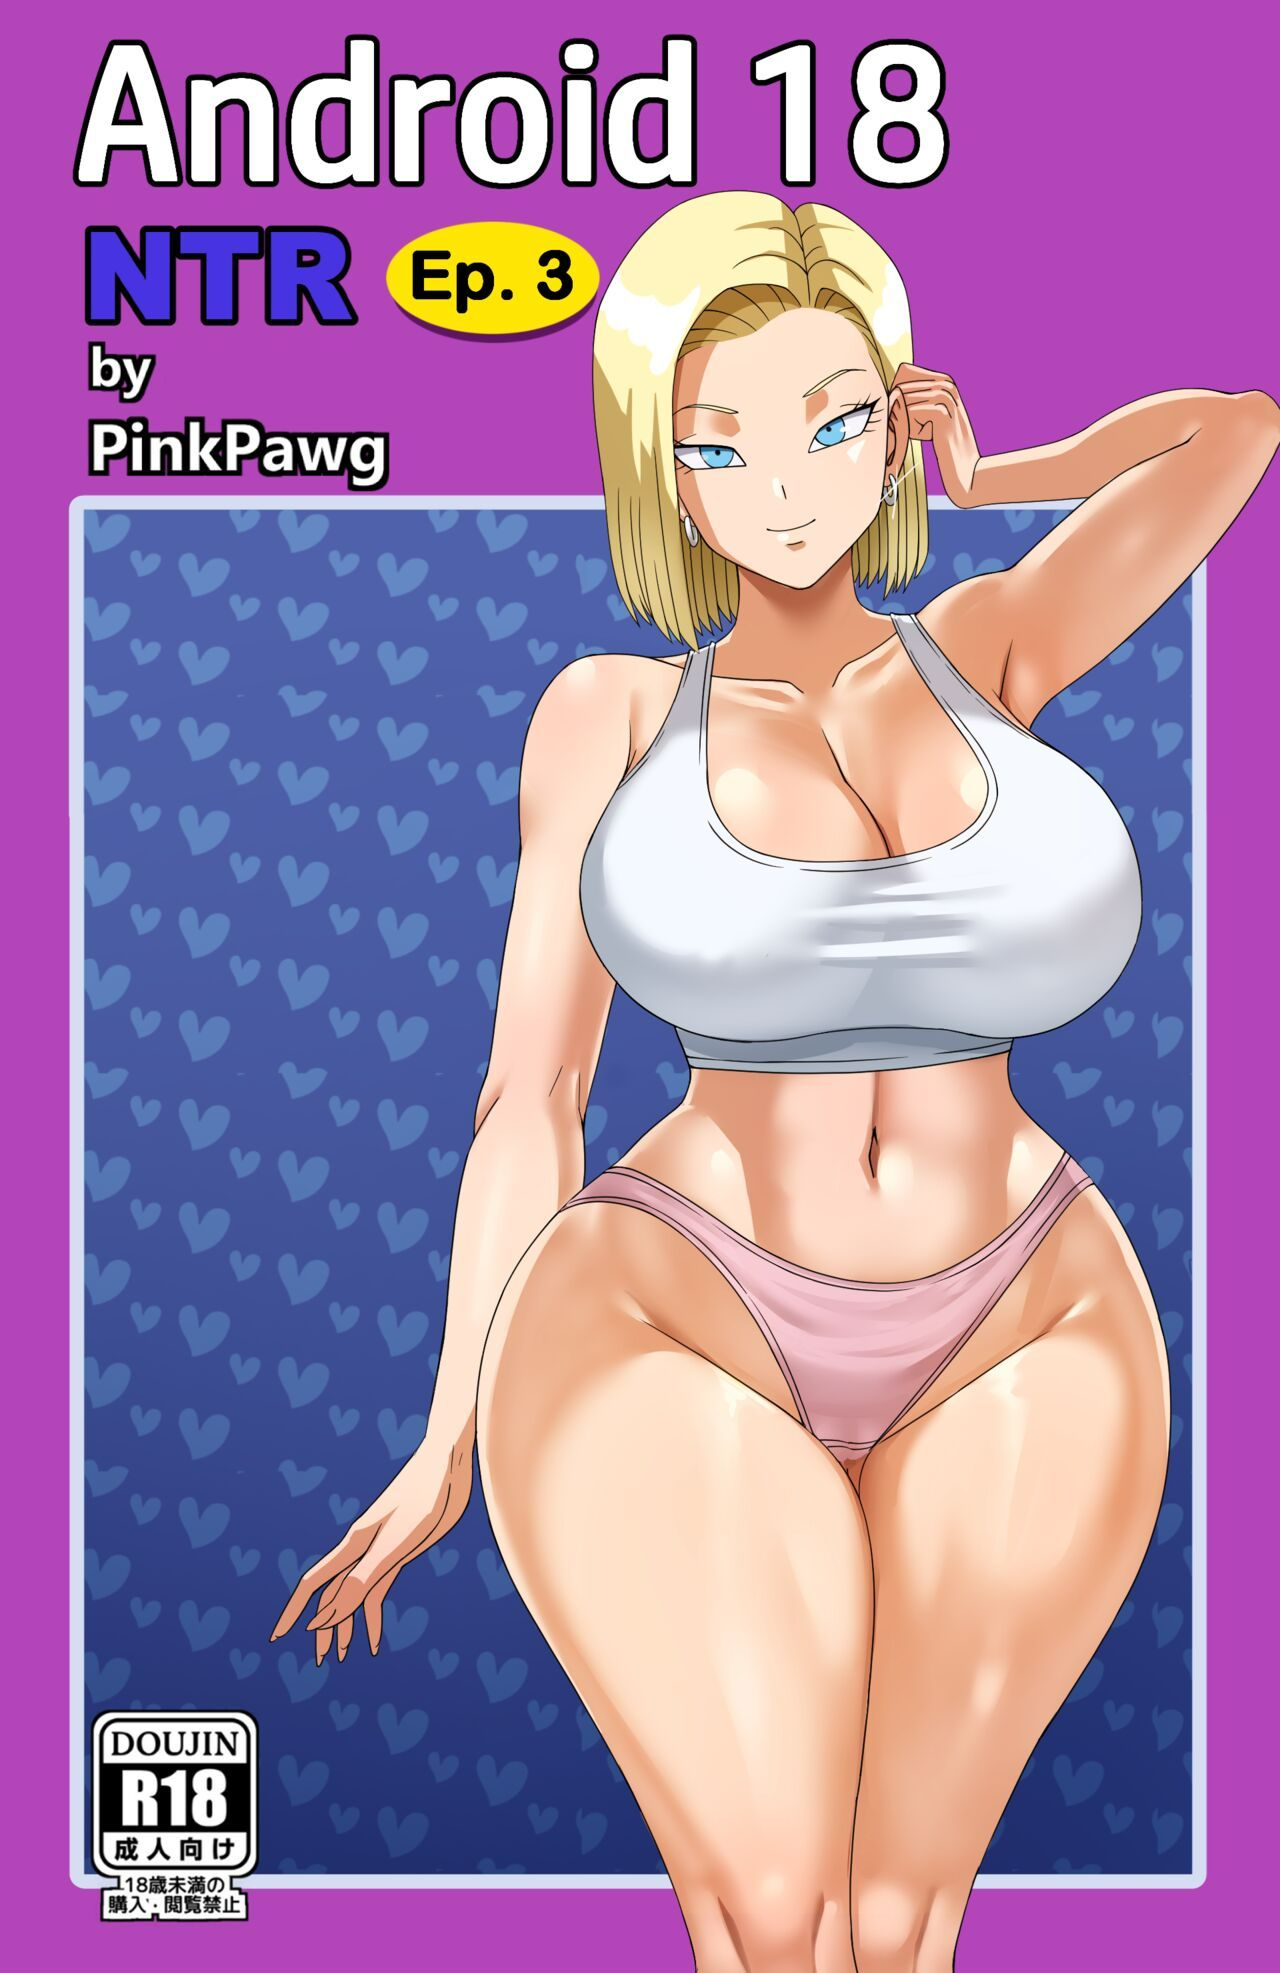 Android 18 Daughter Porn - Android 18 NTR 3 (Dragon Ball) [Pink Pawg] - English - Porn Comic